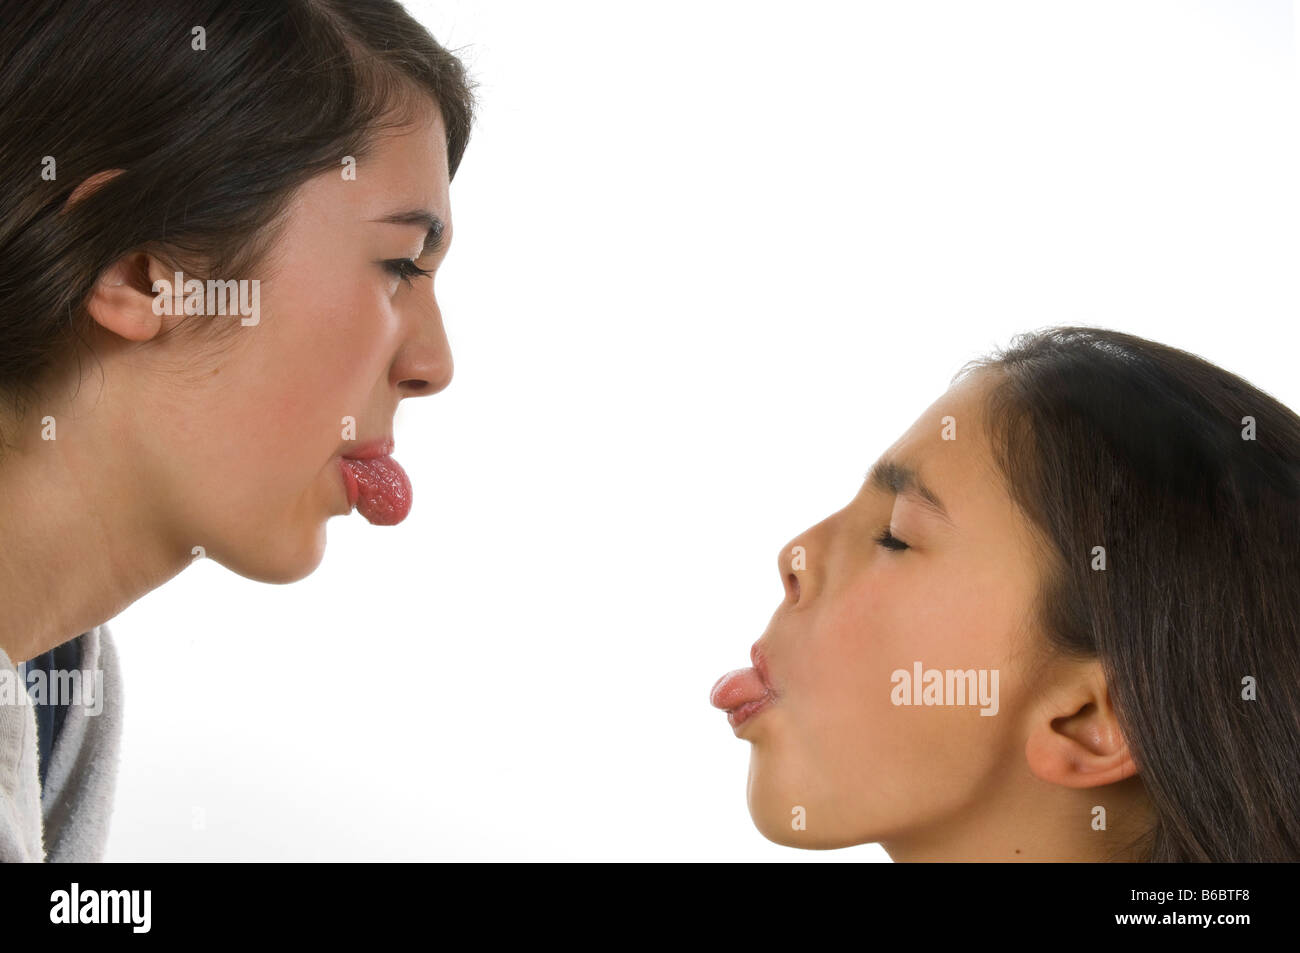 Horizontal close up portrait of two teenage sisters poking their tongues out during a fight against a white background Stock Photo